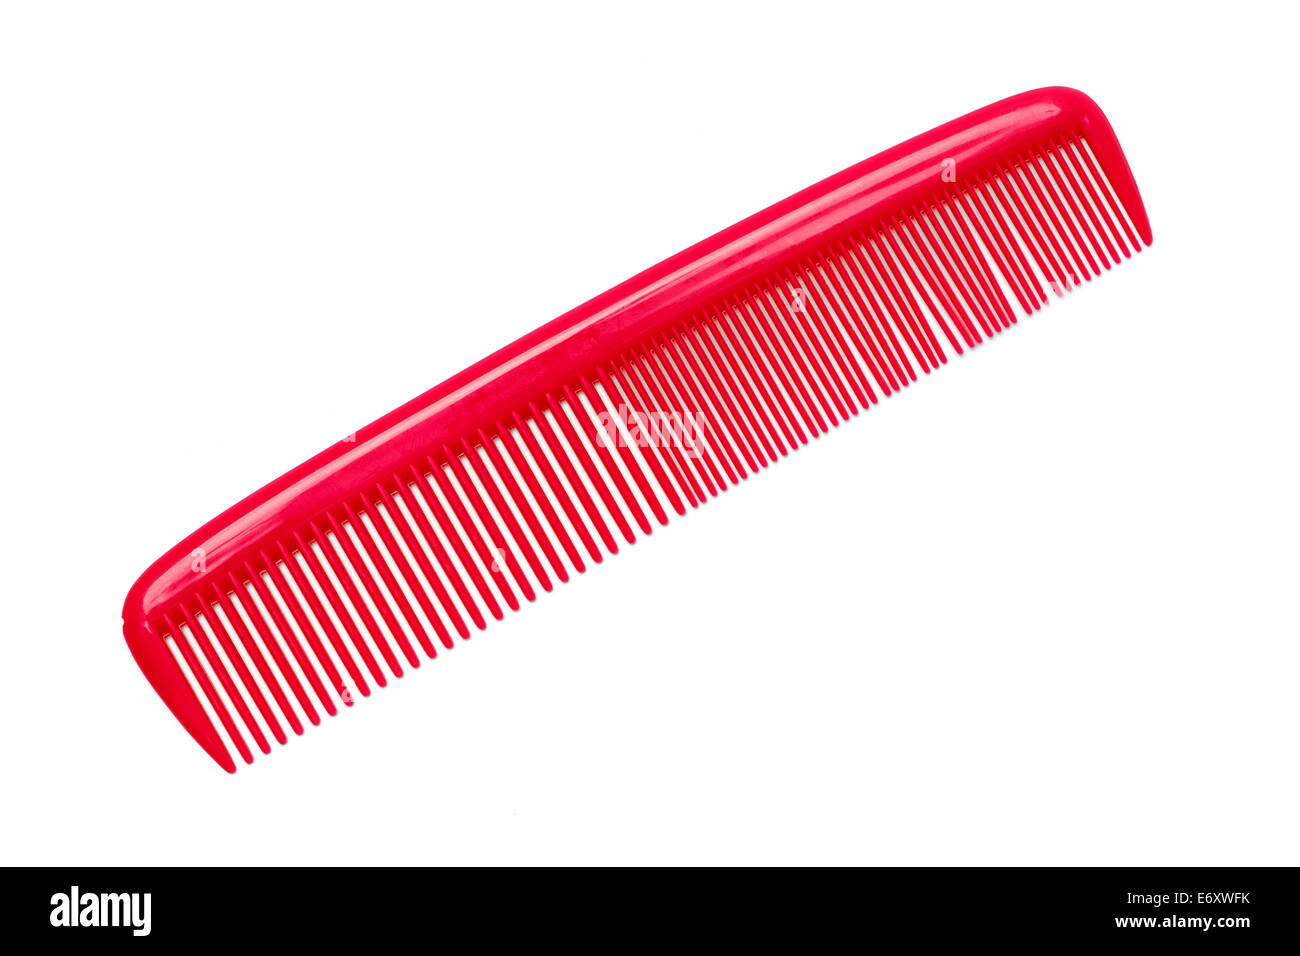 Plastic Hair Comb Isolated on White Background. Stock Photo